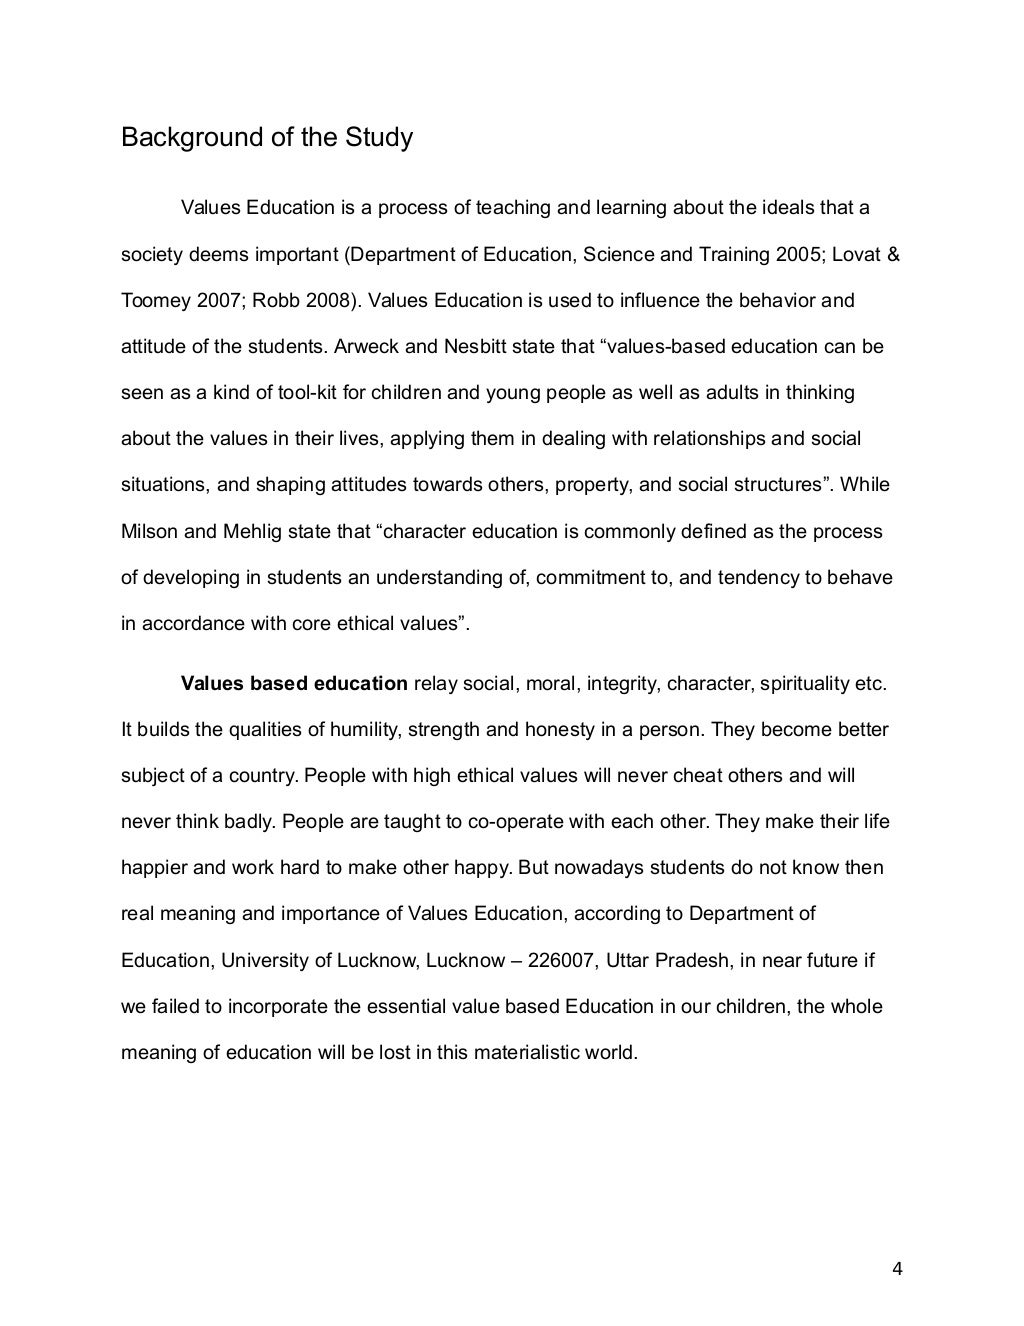 research paper human values